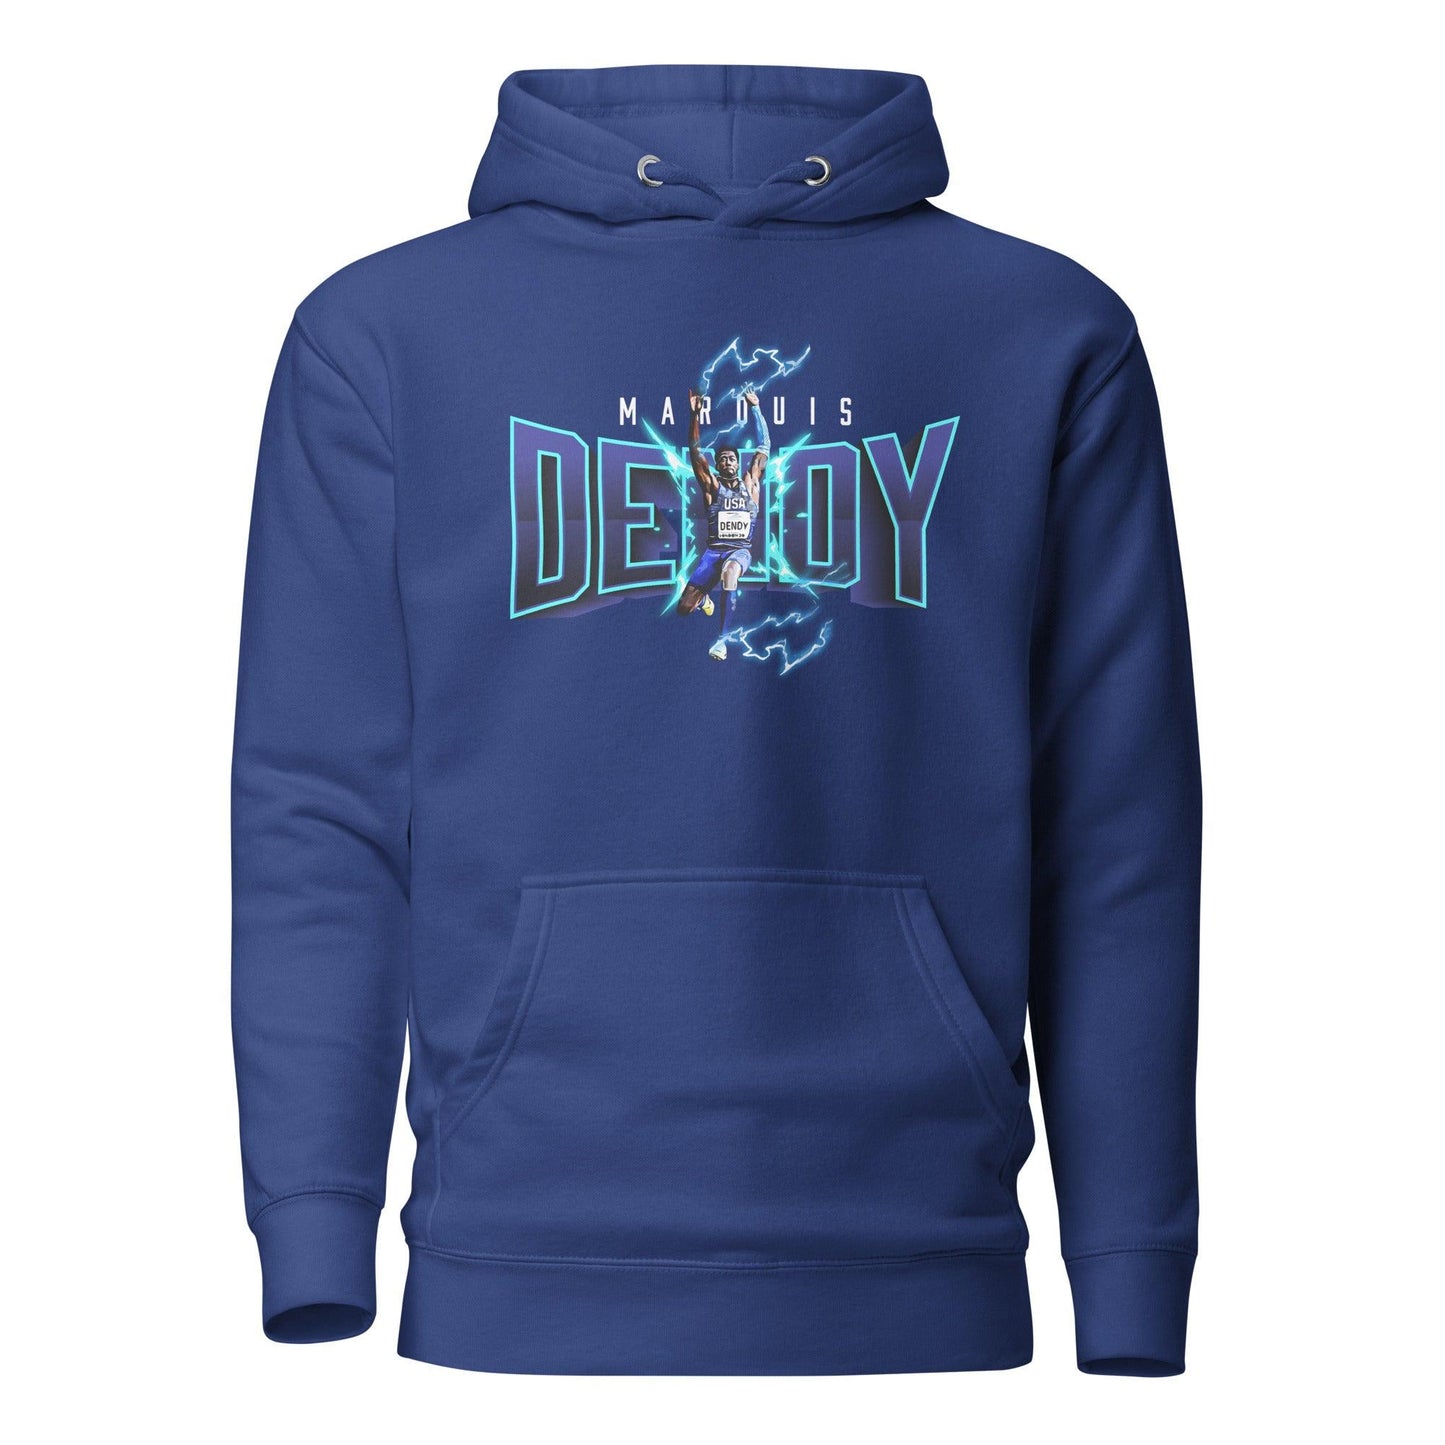 Marquis Dendy "Electric" Hoodie - Fan Arch